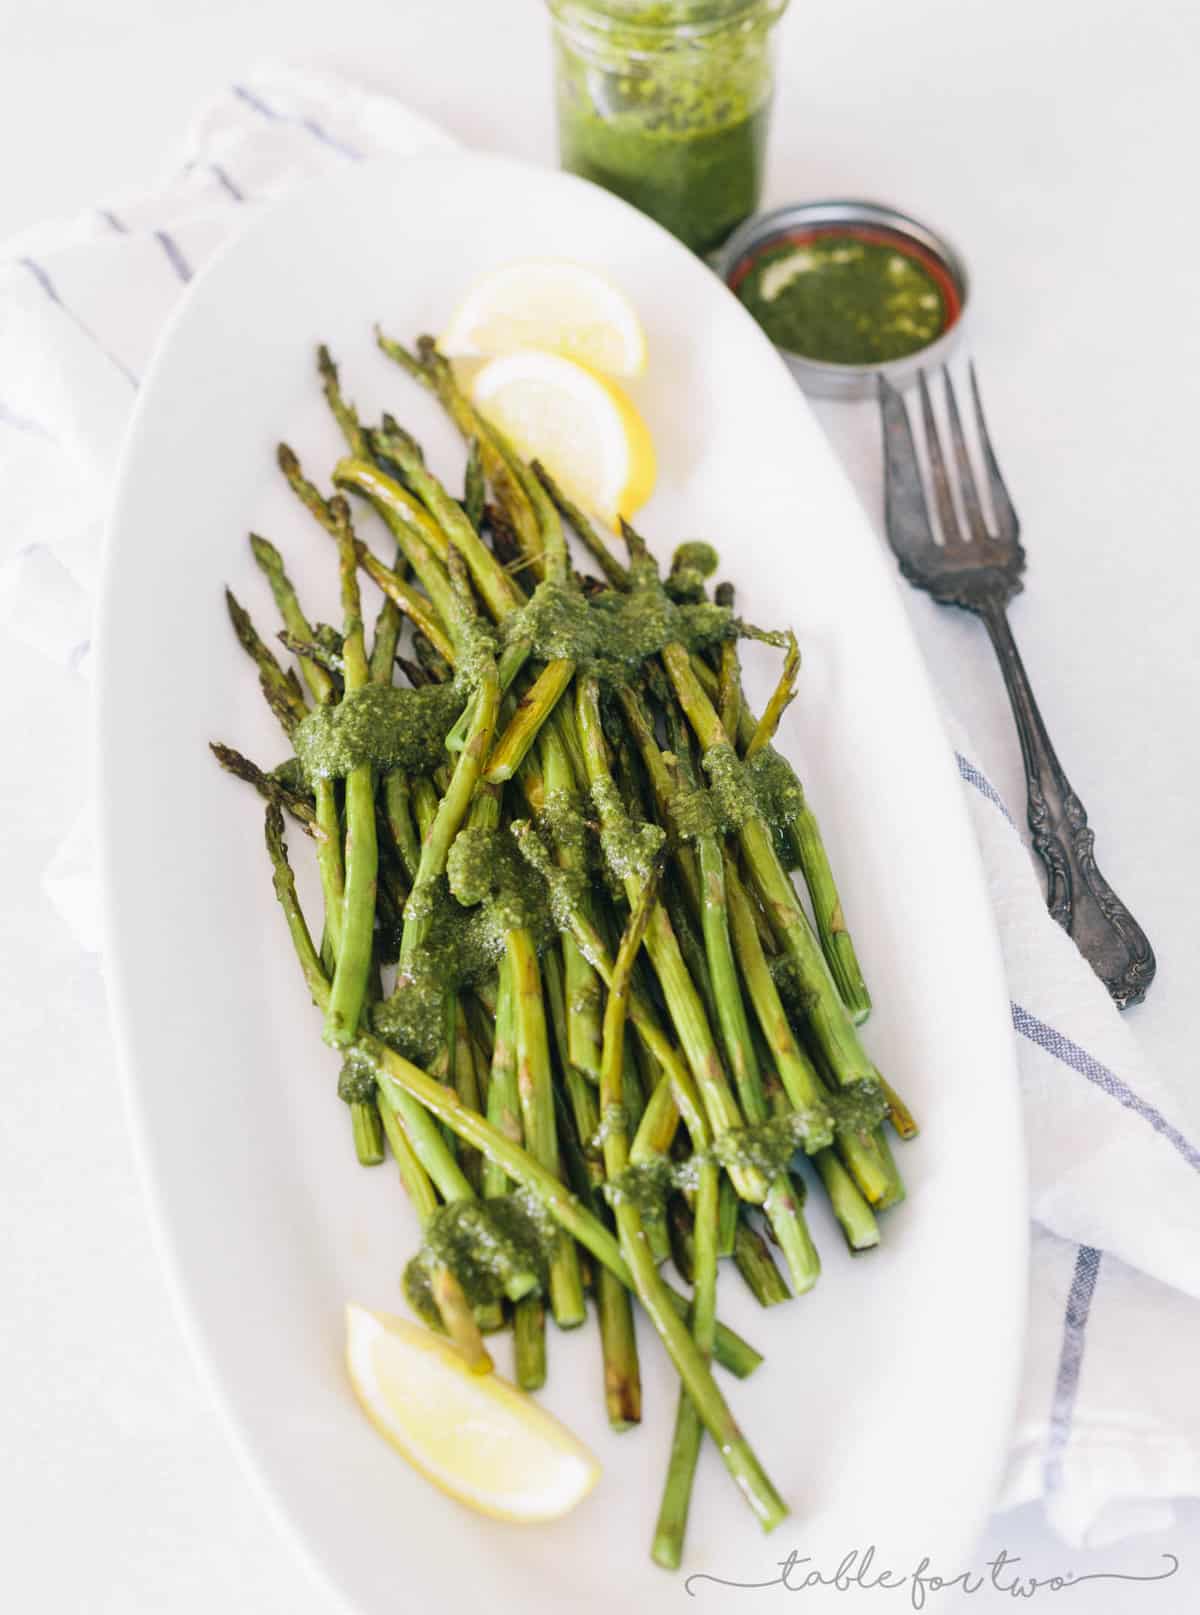 Dress up your asparagus this season with a lemony pesto drizzled all over! This roasted lemony pesto asparagus will be a new favorite side dish!